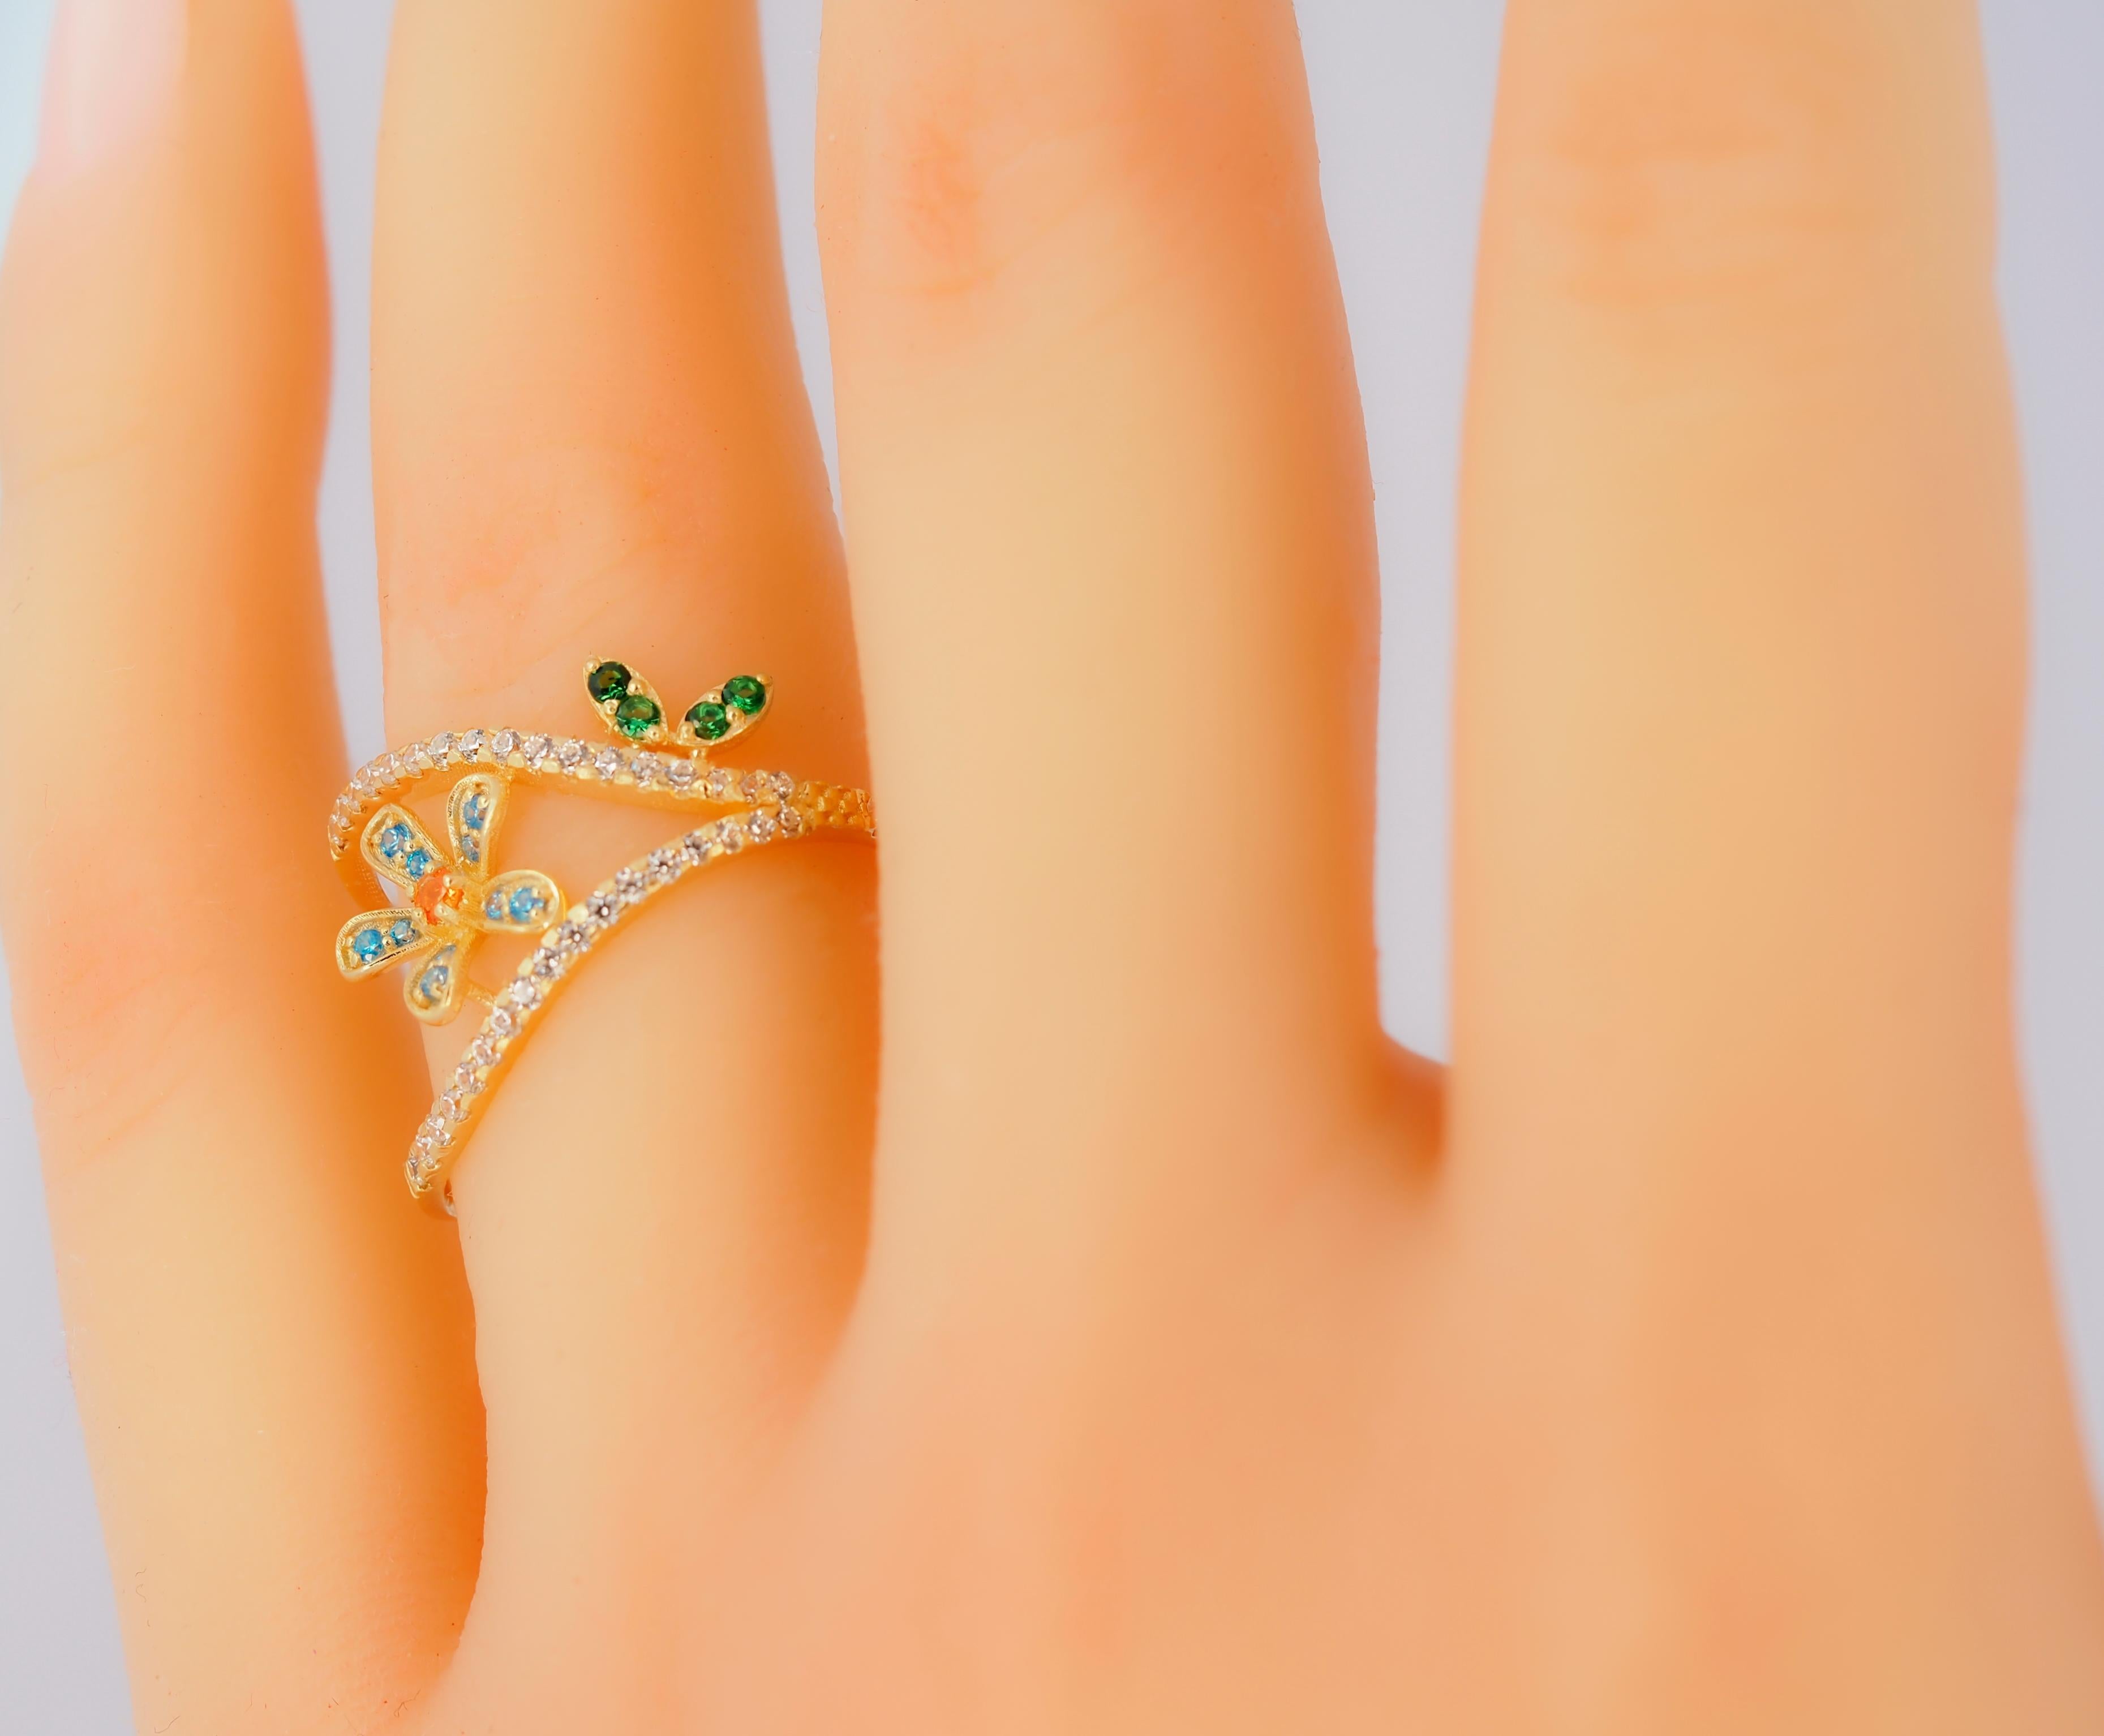 For Sale:  Blue Flower with leaves 14k gold ring. 5